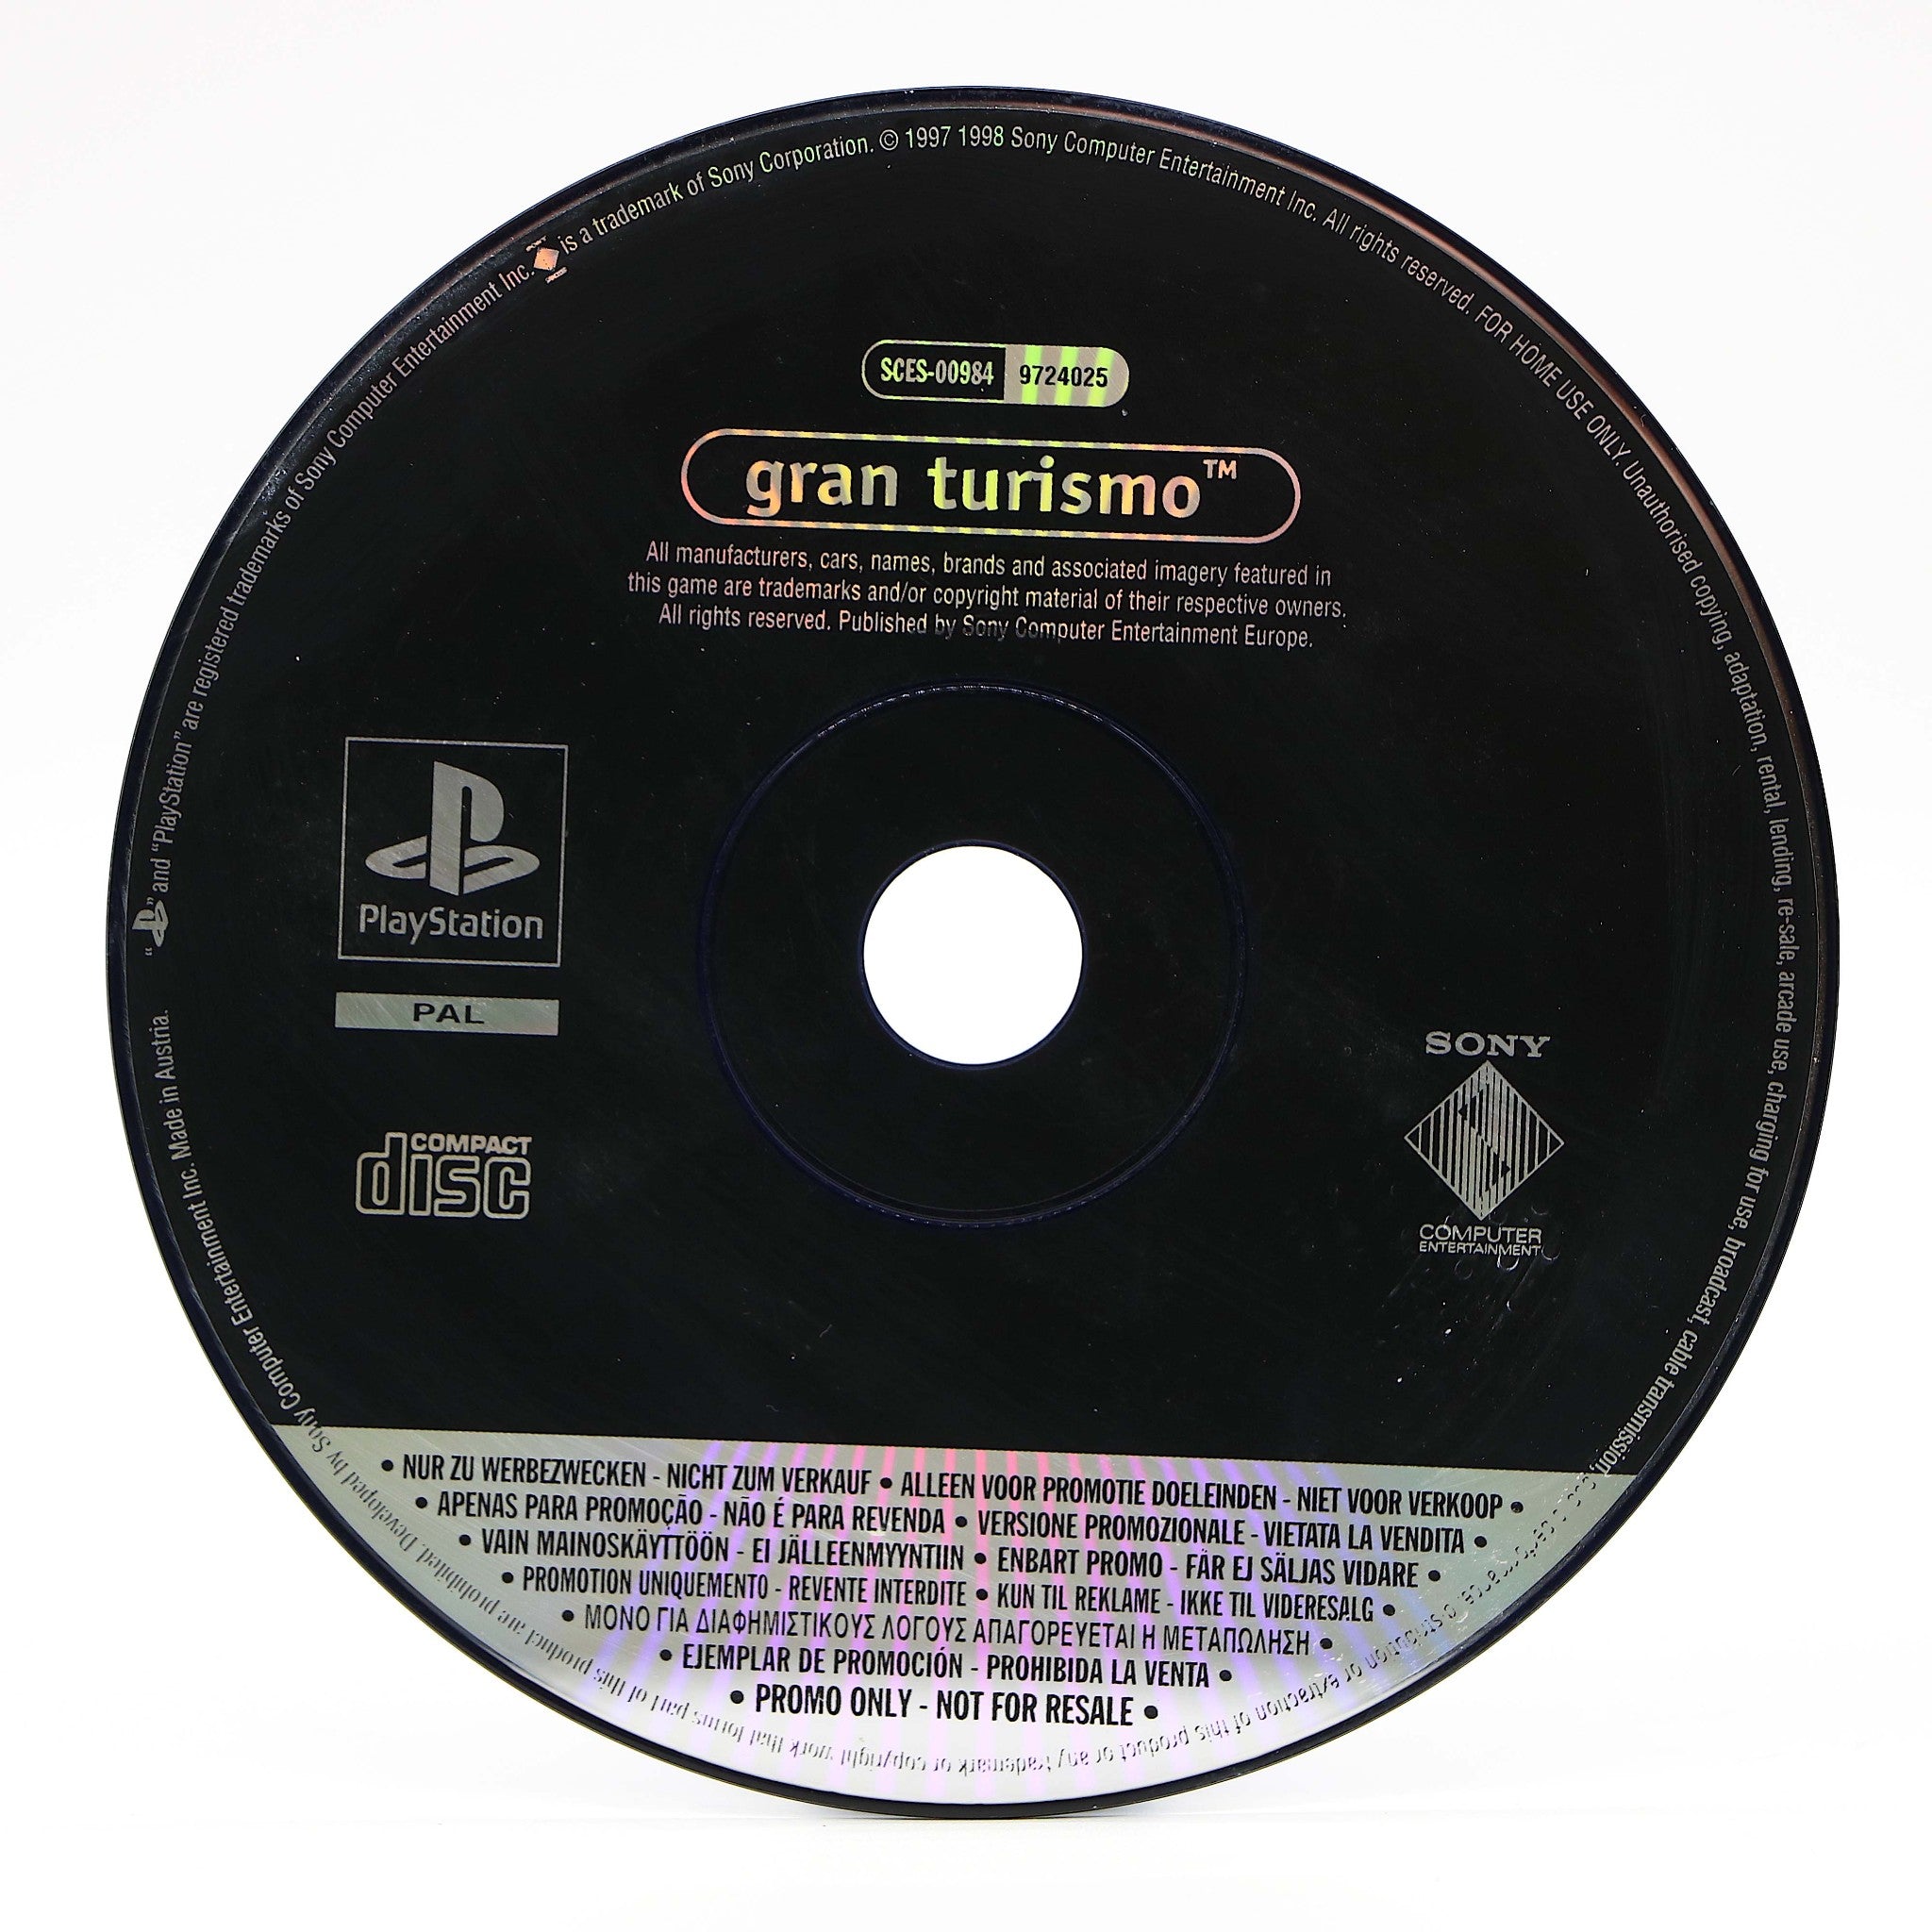 Gran Turismo | Sony PSONE PS1 Game | Promo Version | Collectable Condition